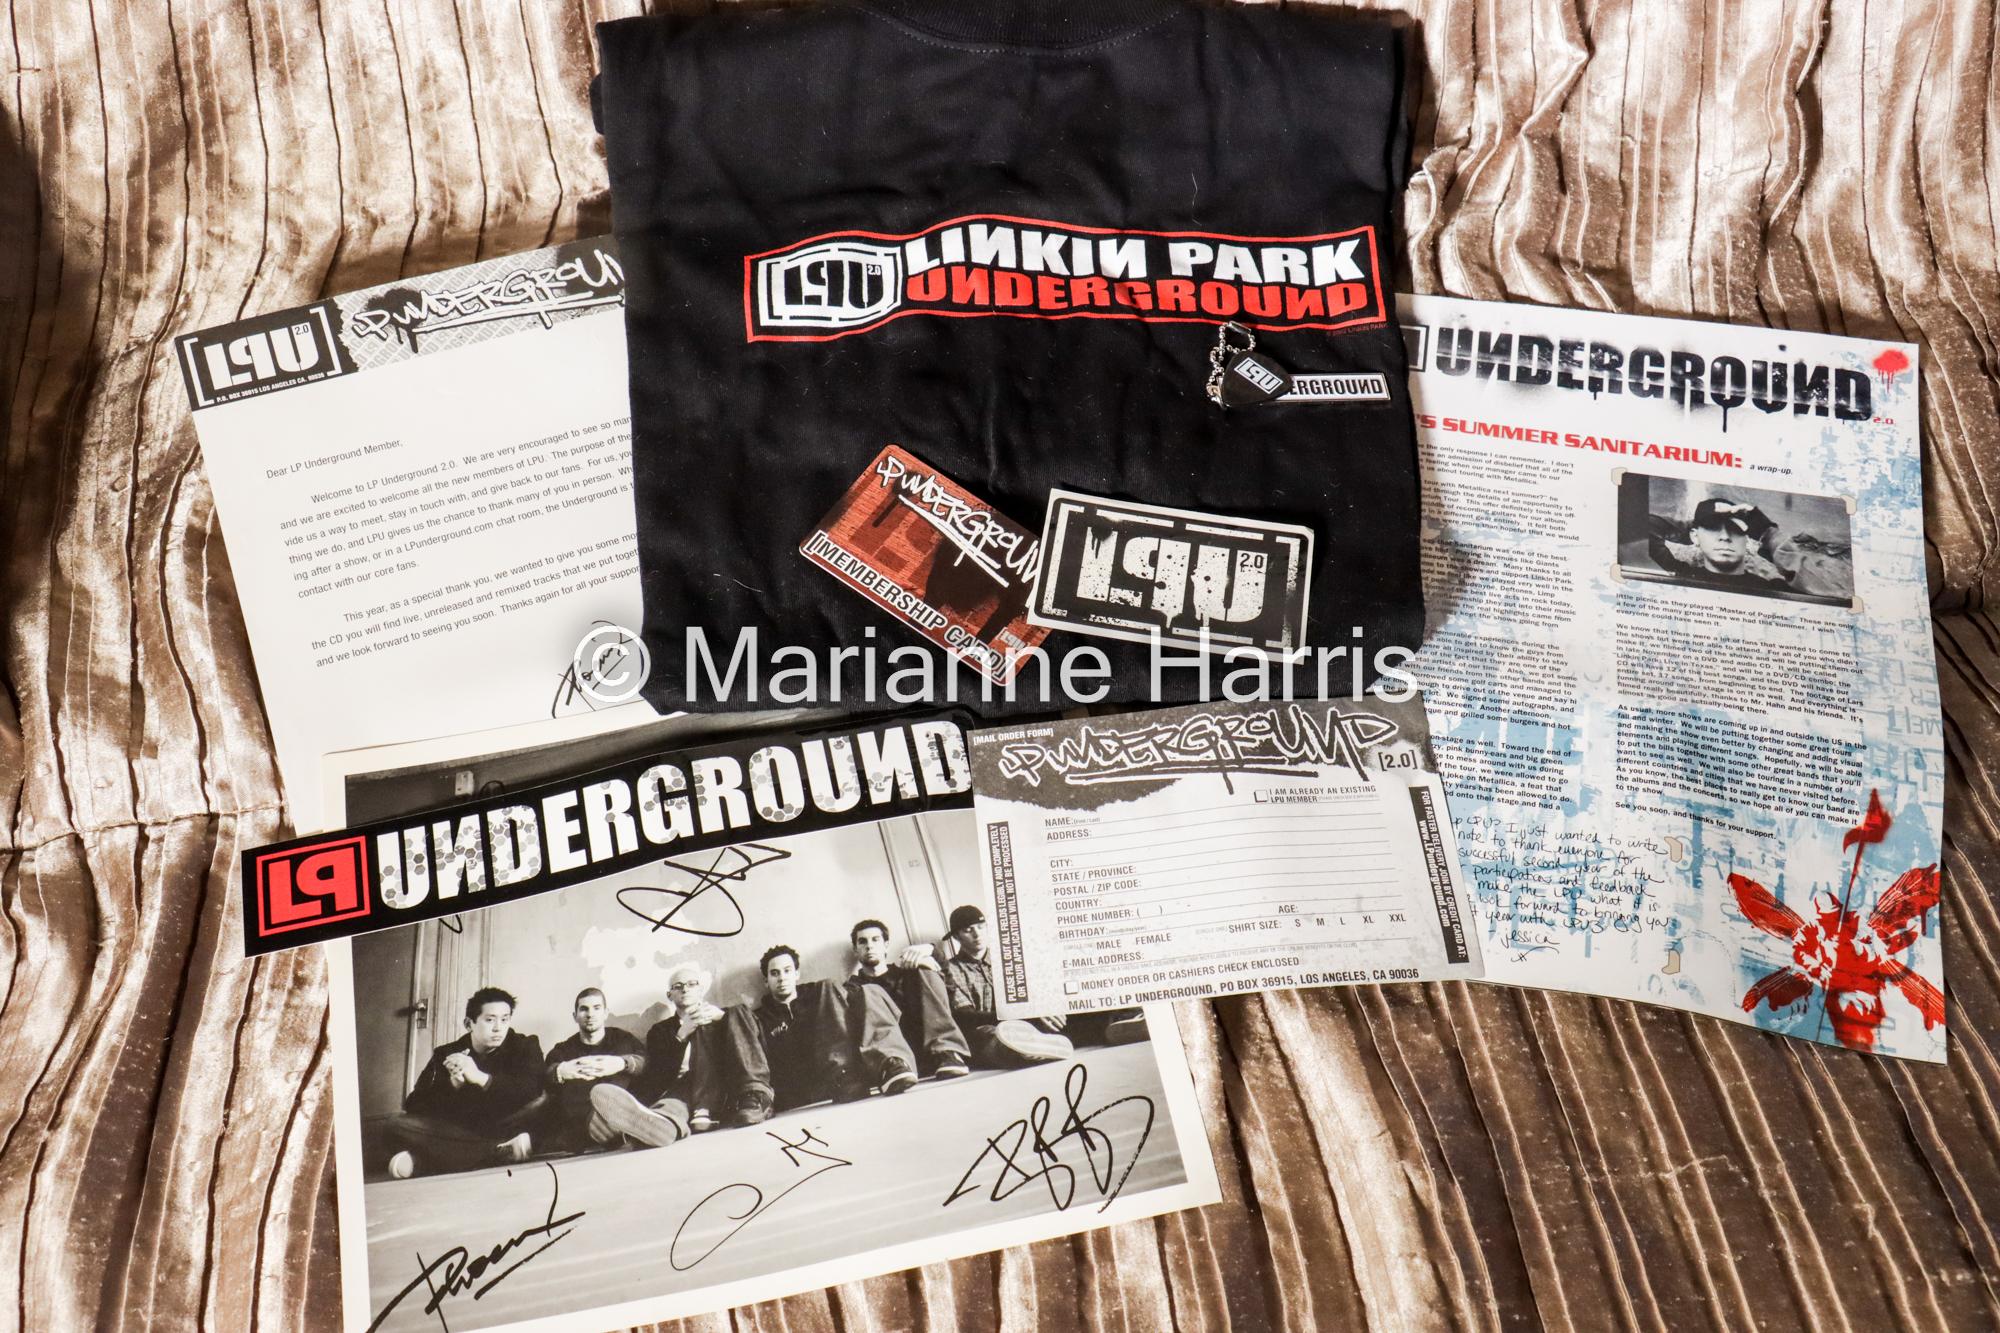 Linkin Park Underground 2 membership package, without CD